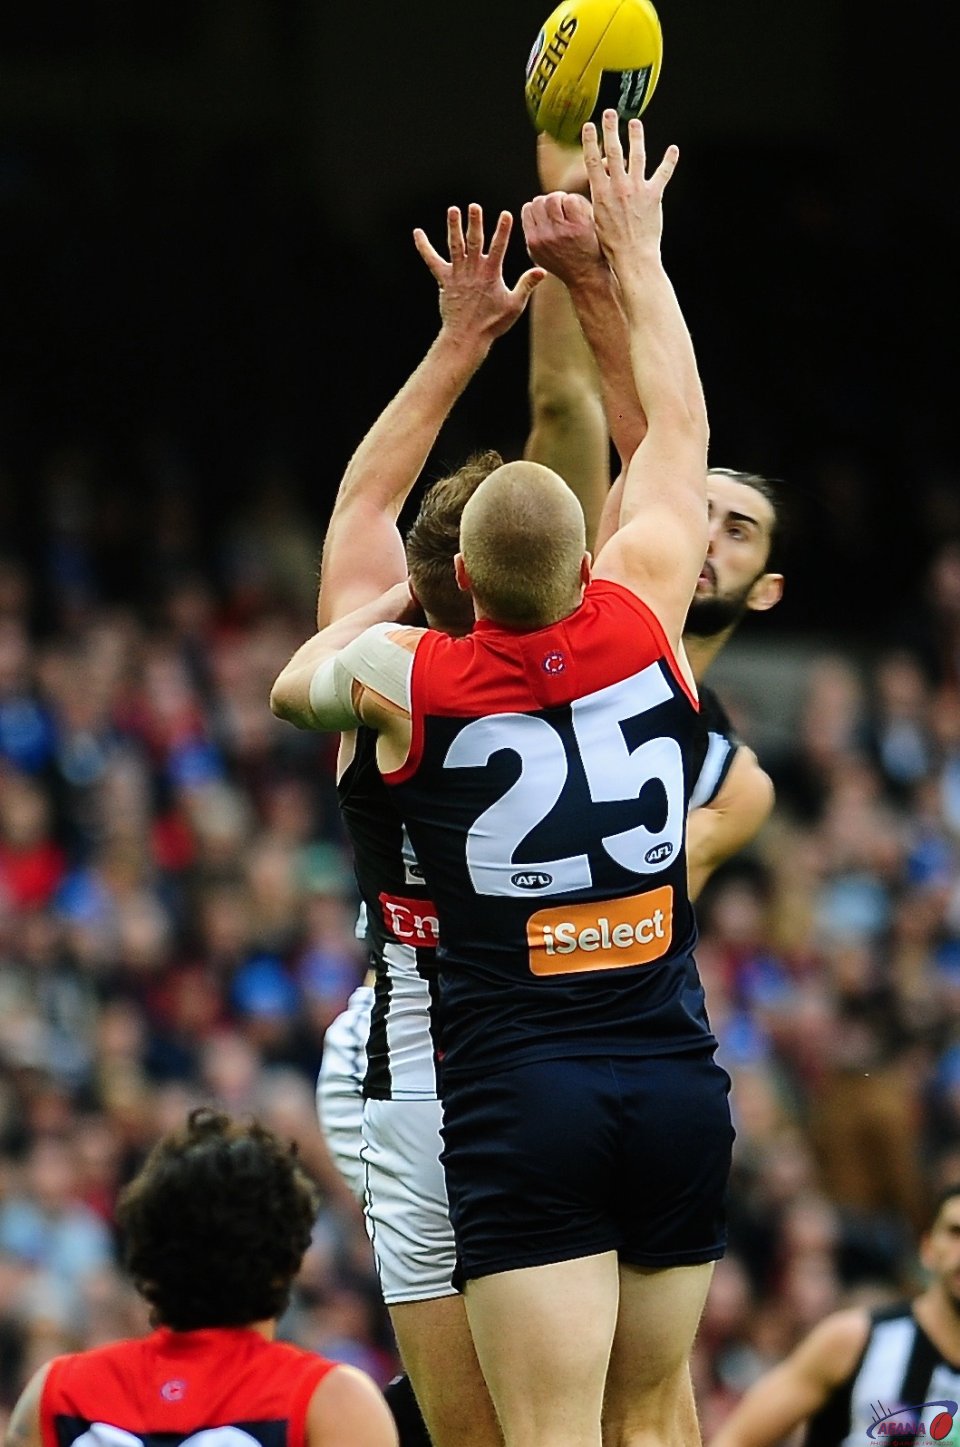 Tom McDonald and Brodie Grundy contest the ball up